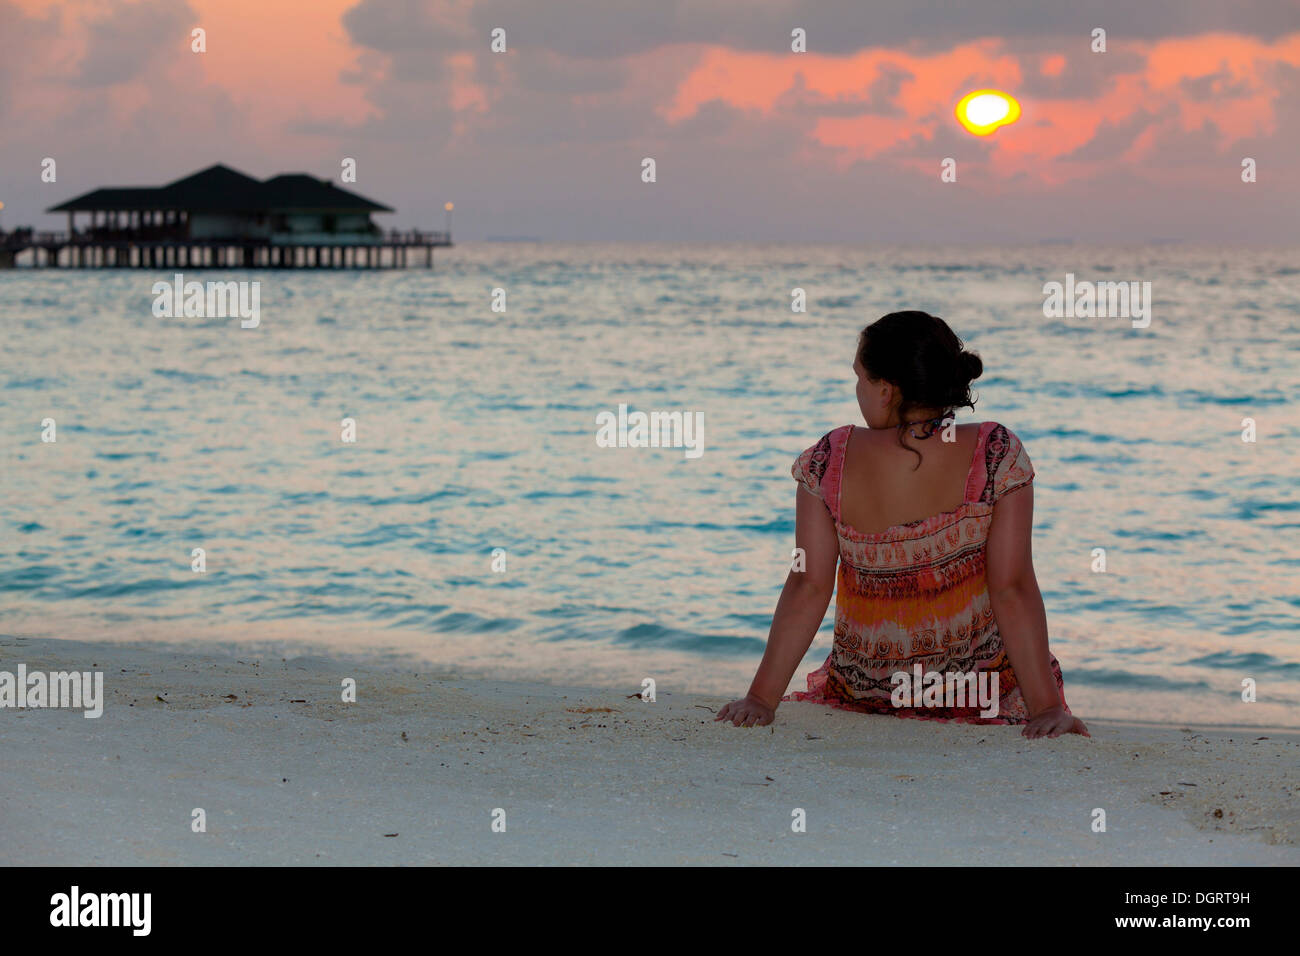 A girl, about 15 years old, sitting on the beach watching the sunset, North Male Atoll, Republic of Maldives, Indian Ocean, Asia Stock Photo